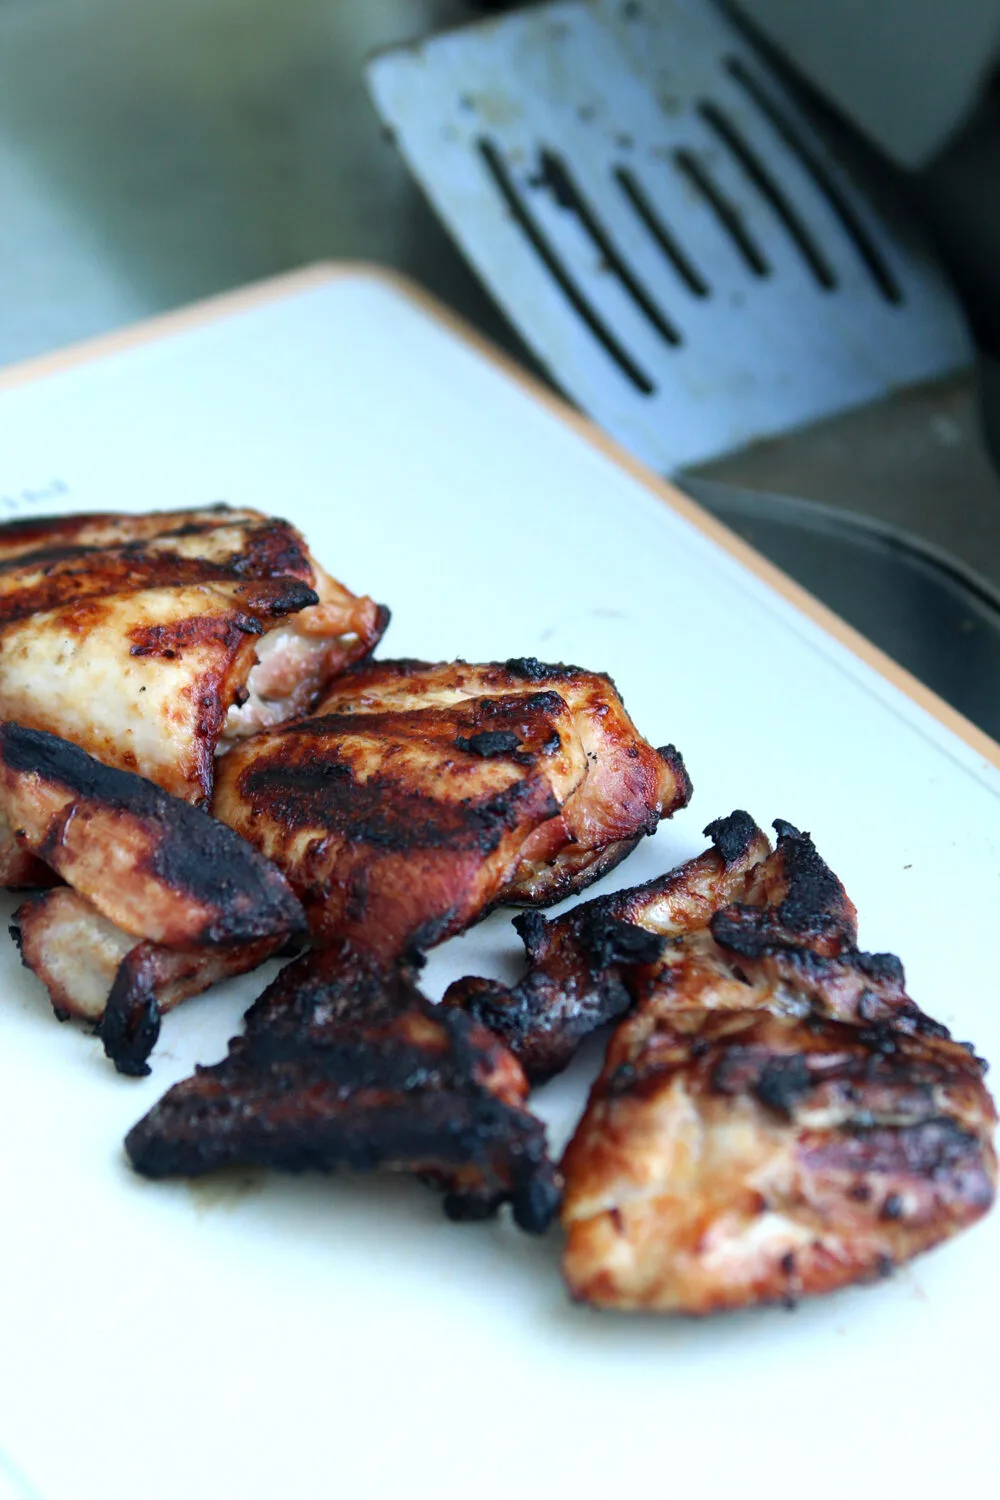 Cooked chicken thighs are shown on a cutting board. They are browned and golden and a reddish color with grill marks.